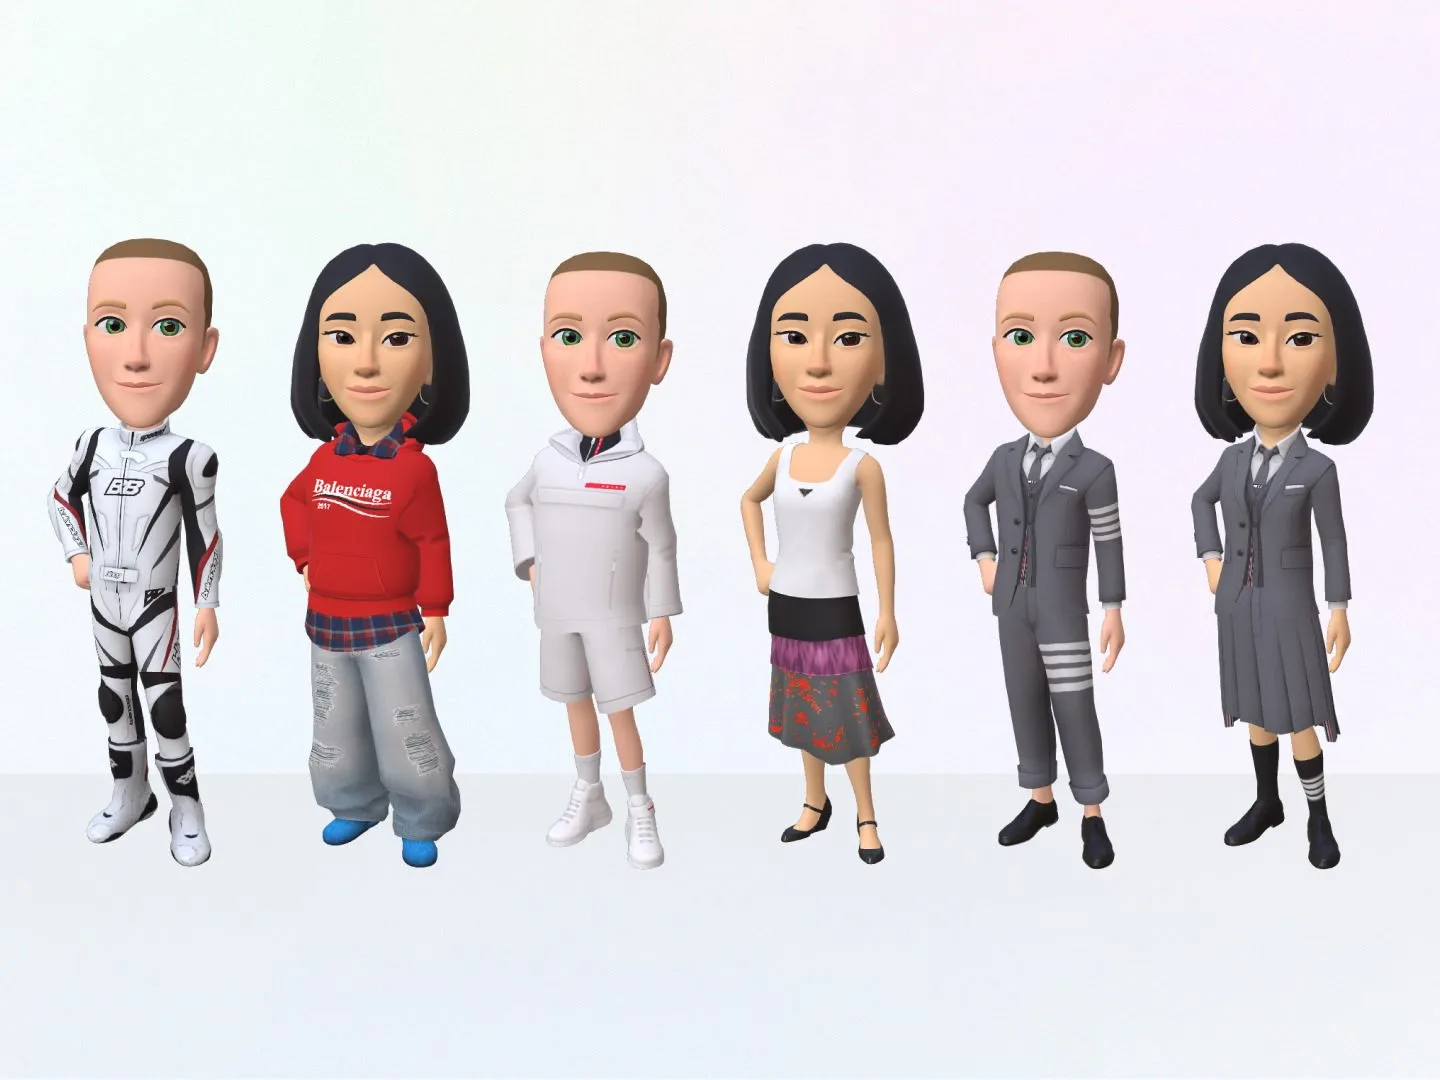 The Meta Avatar Store allows the users to digitally shop for their avatar's outfits from Balenciaga, Prada, and Thom Browne.